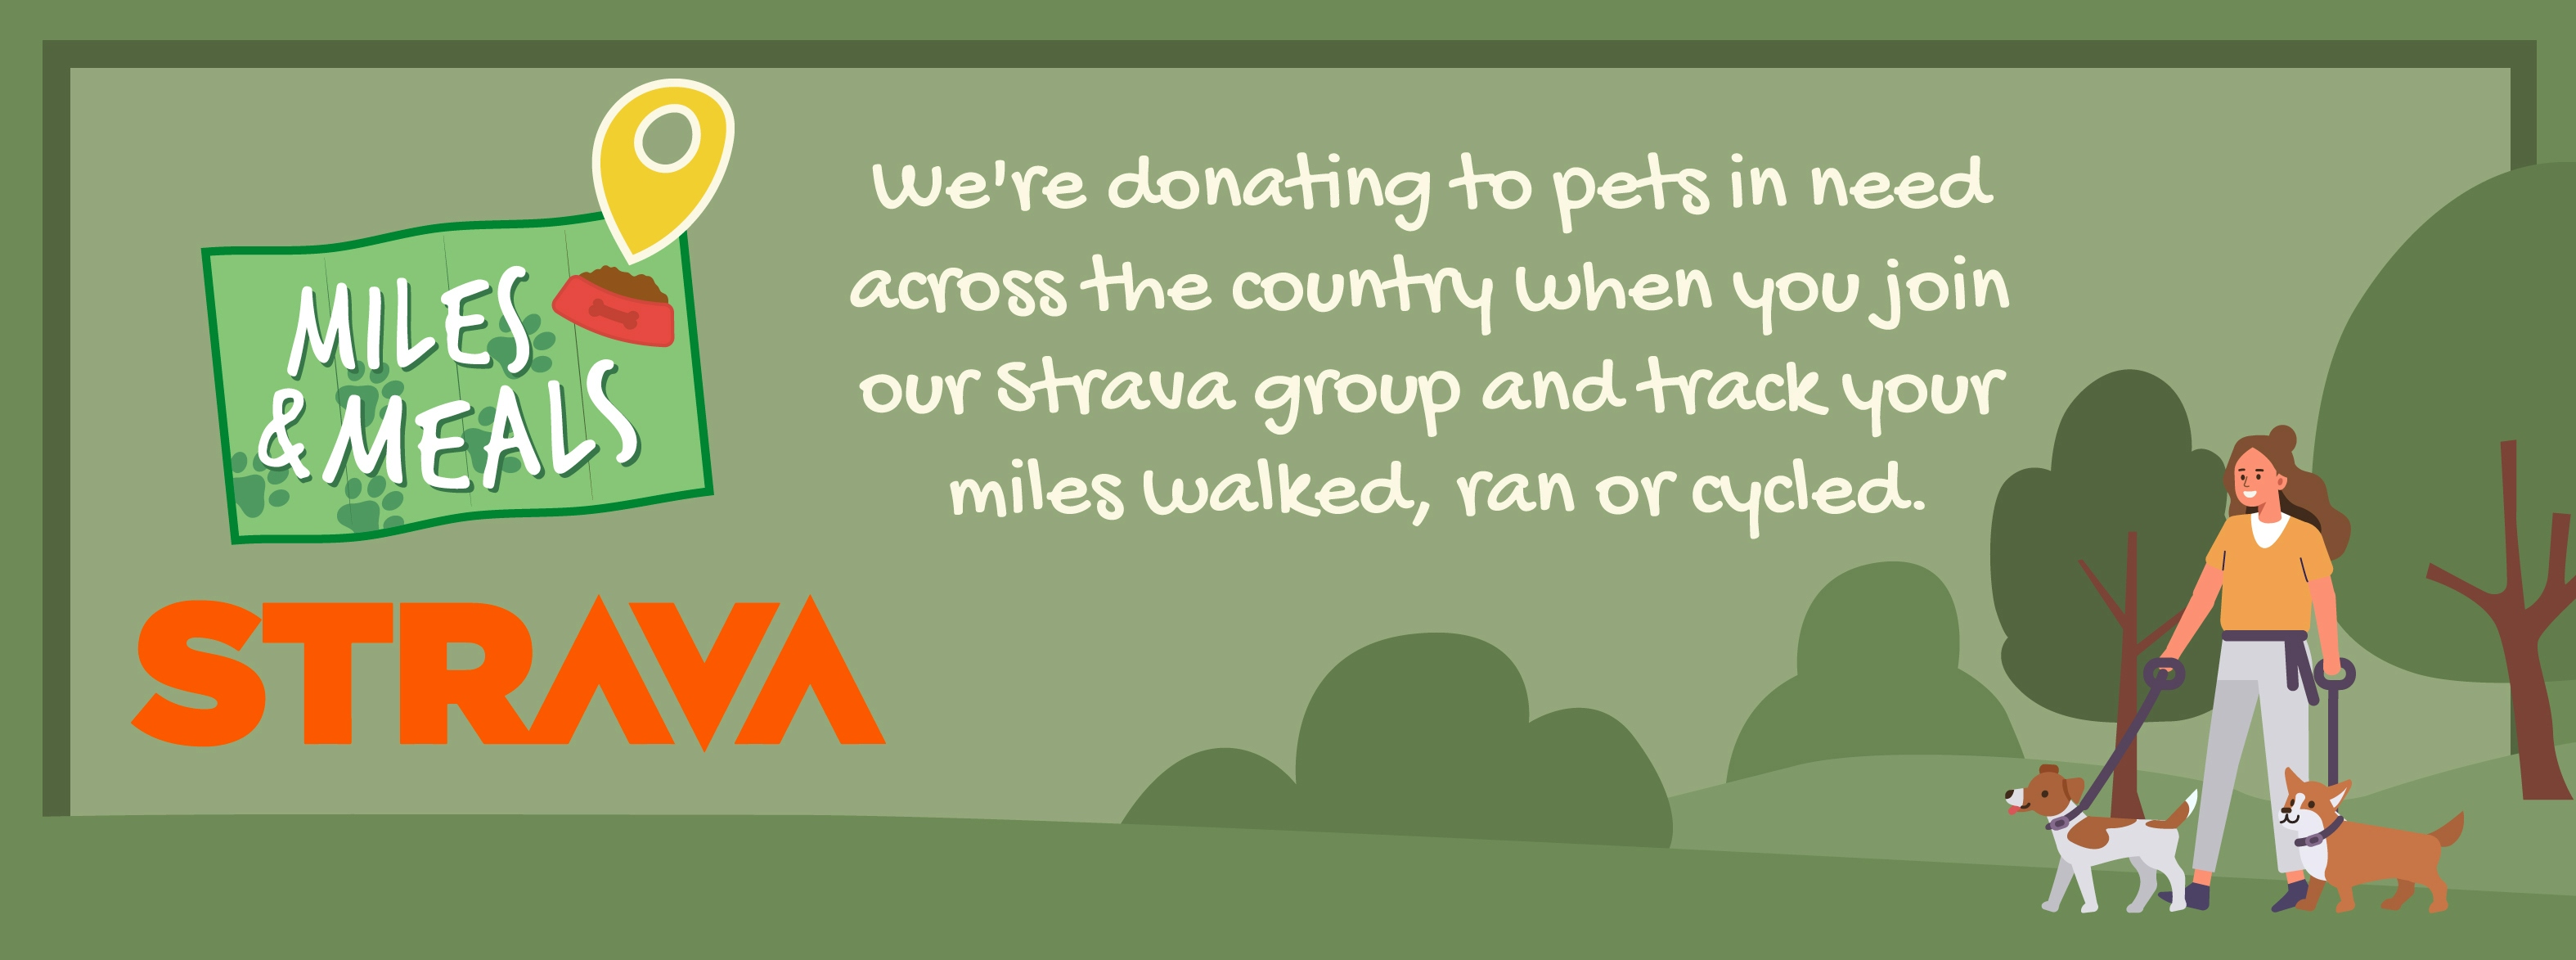 We're donating to pets in need across the country when you join our Strava group and track your miles walked, ran or cycled.